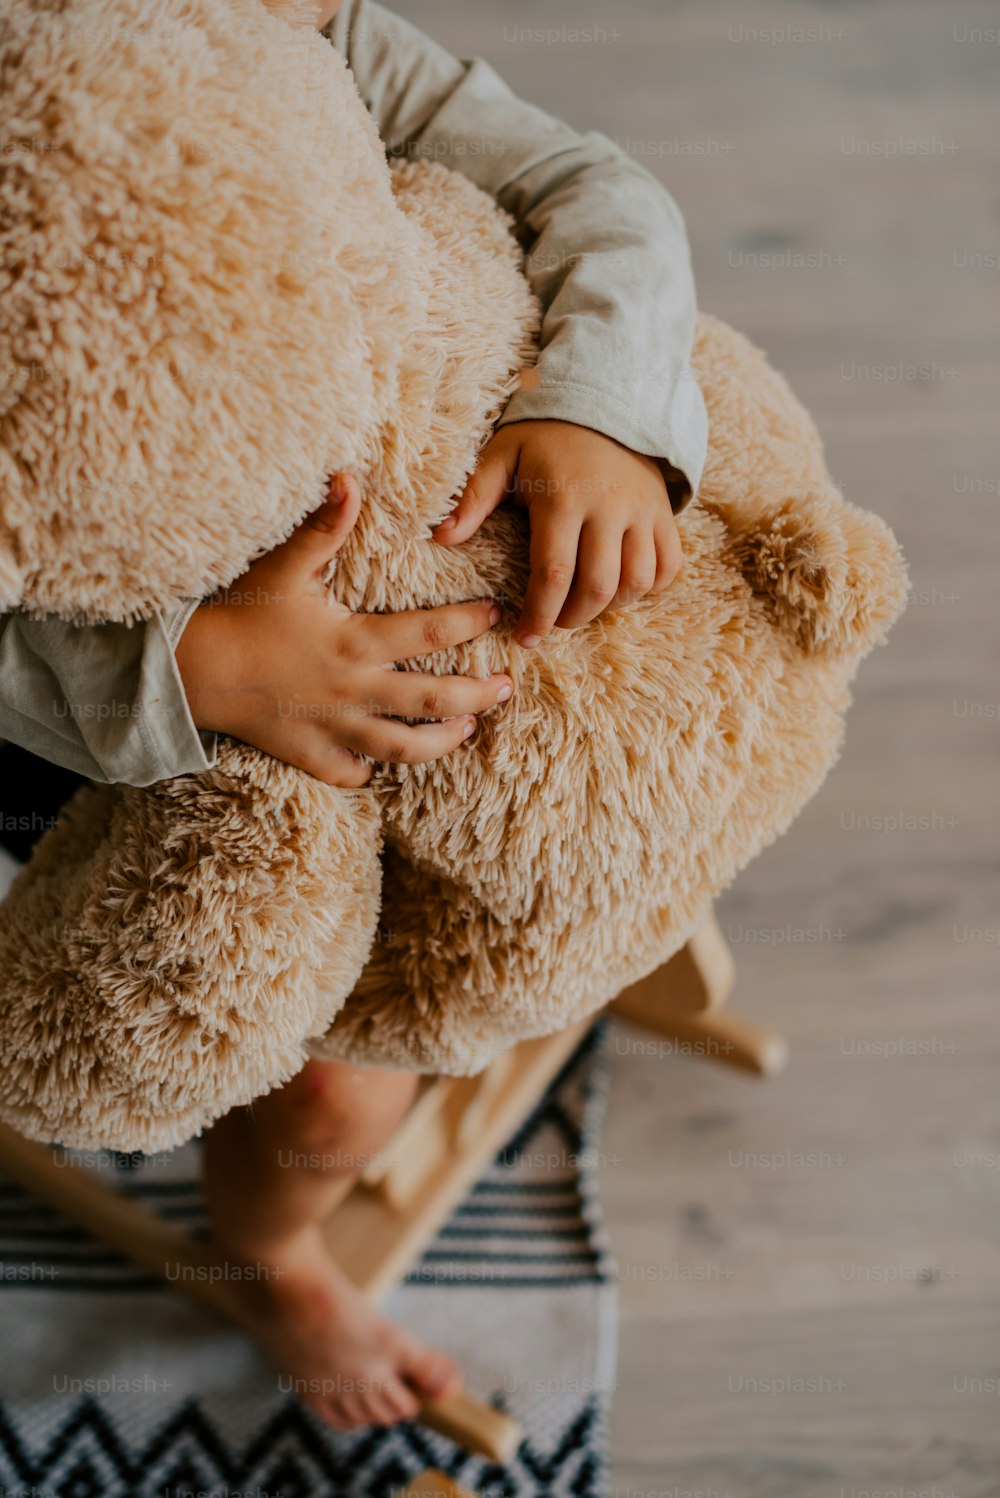 a child holding a teddy bear on top of a rug